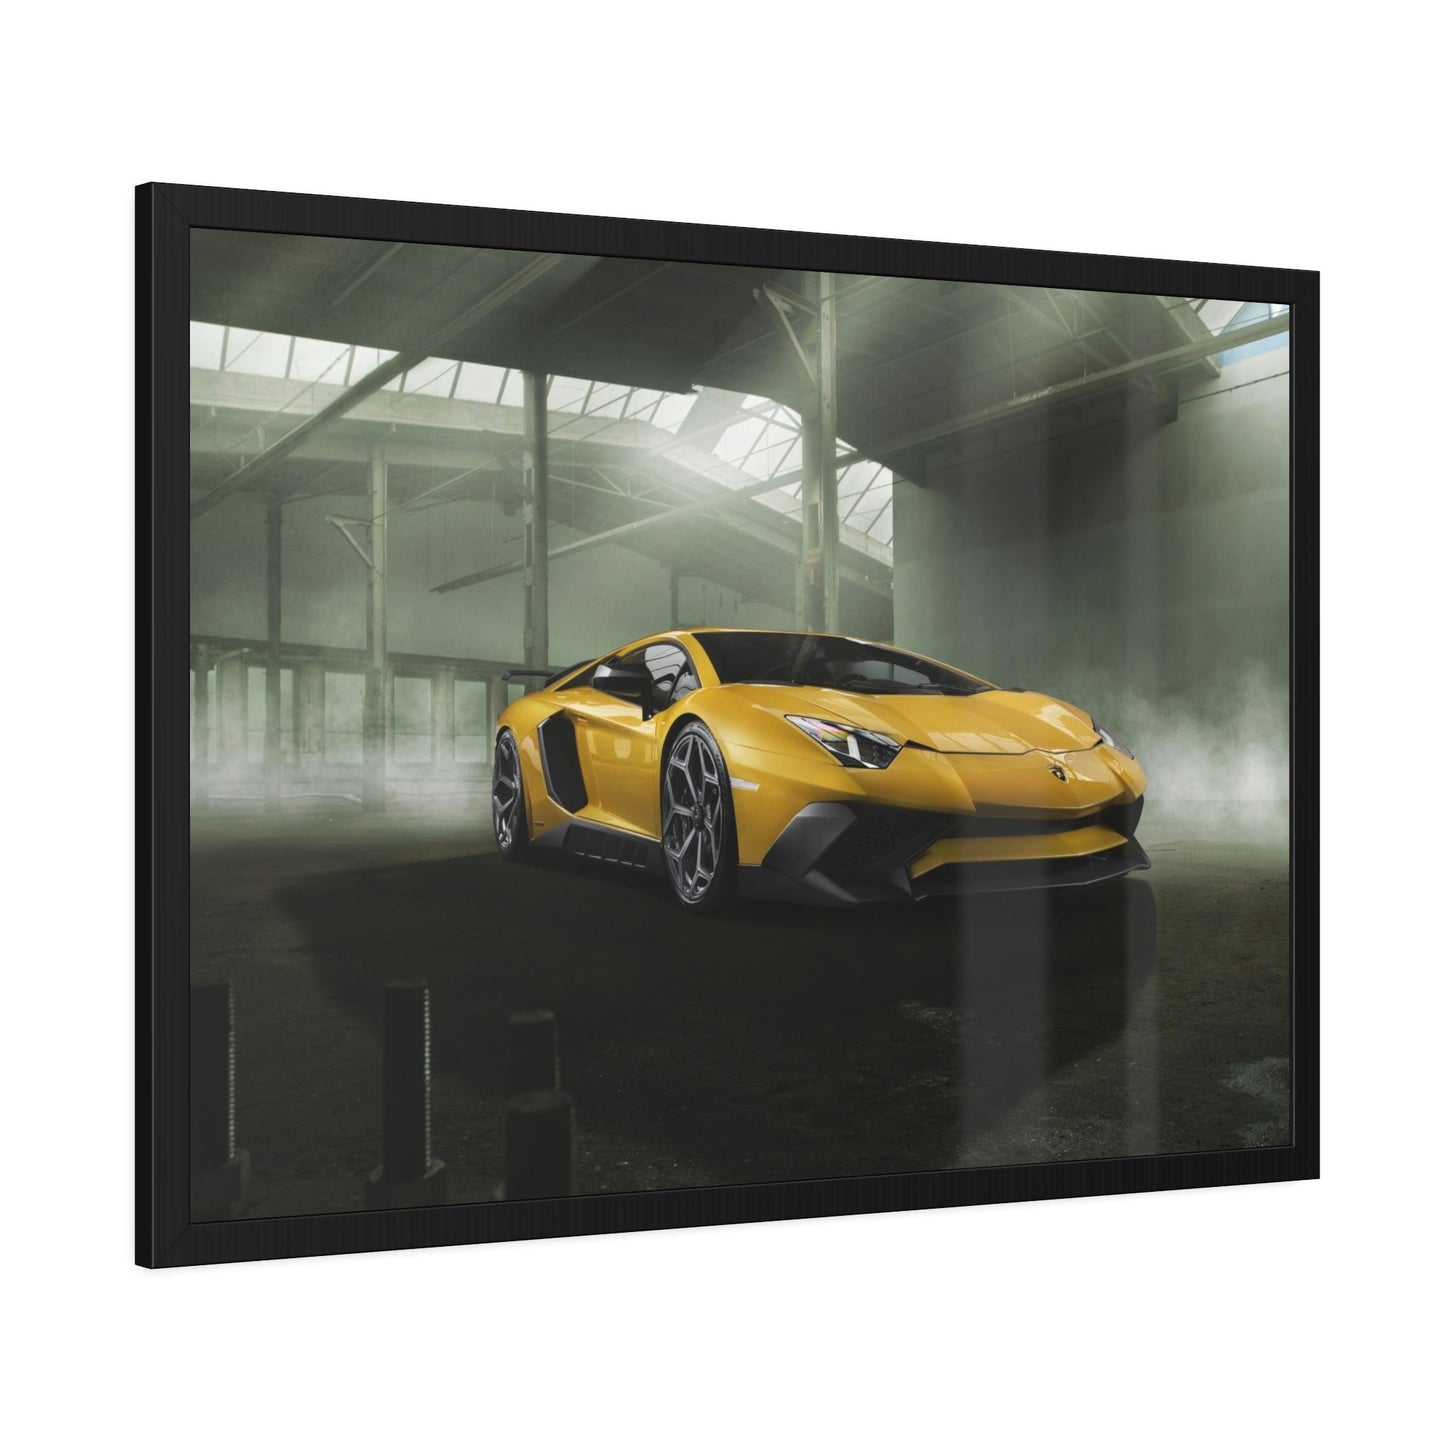 Racing Legends: Iconic Porsche Art Prints and Framed Posters